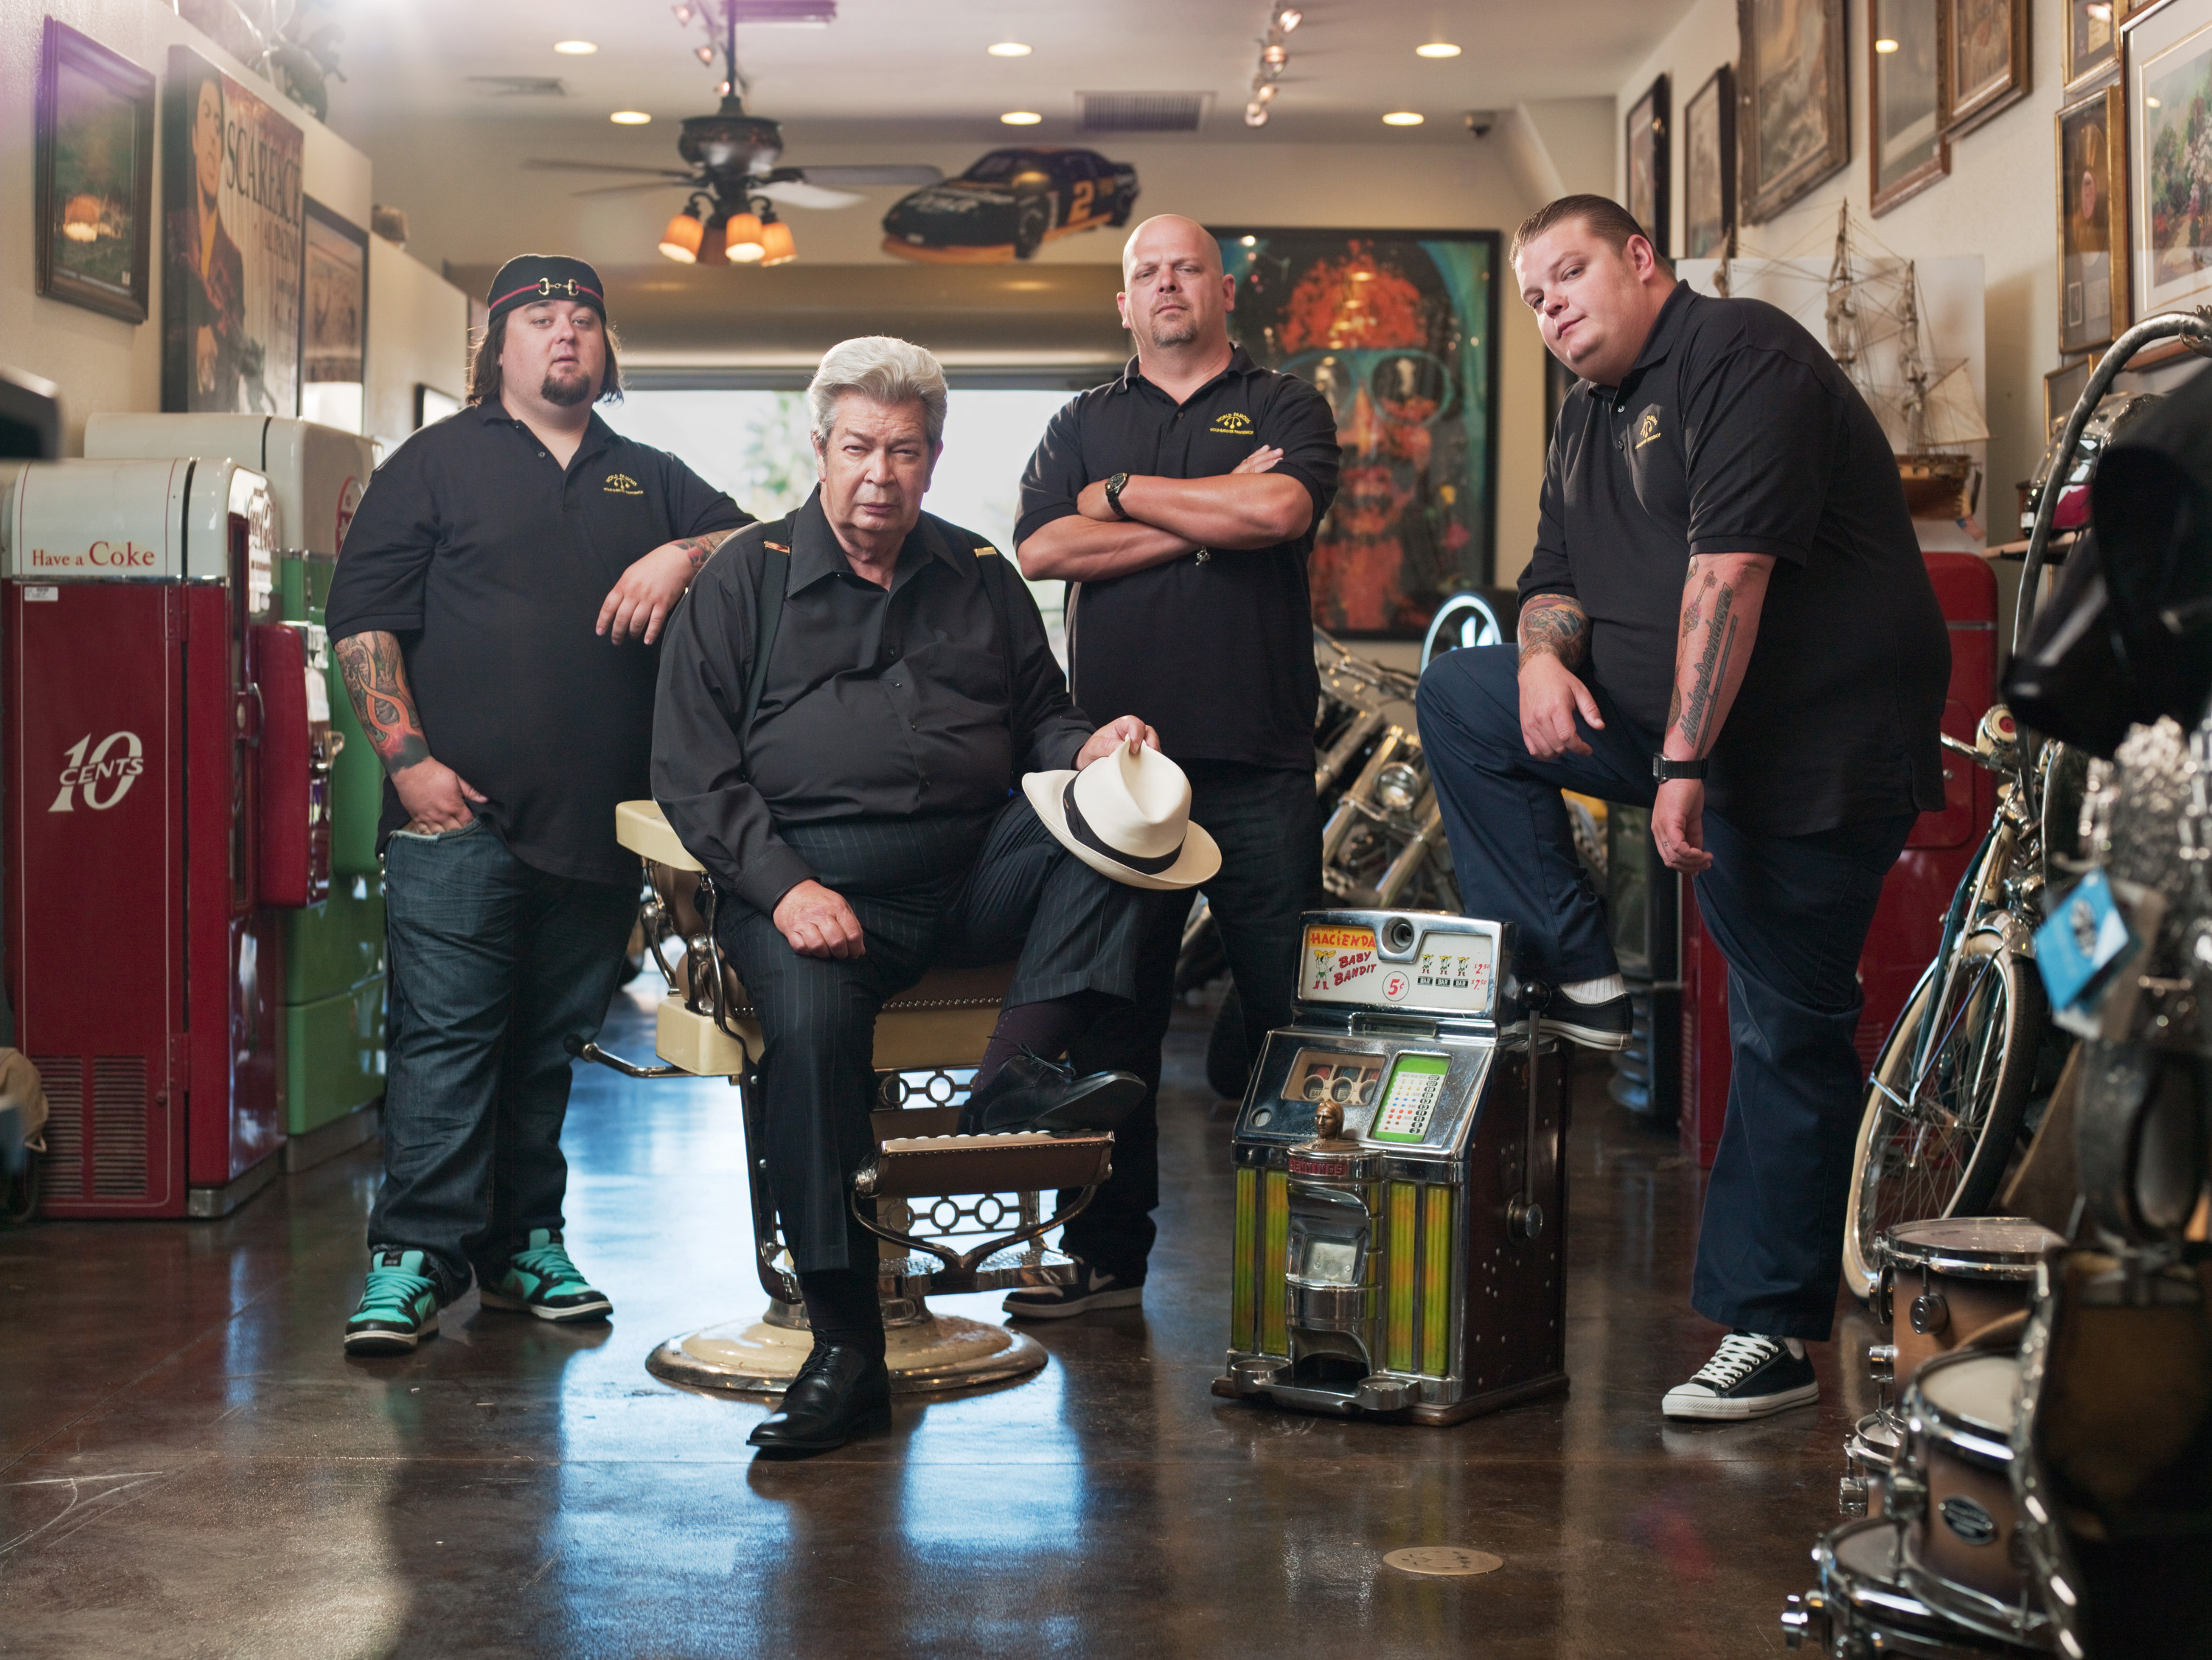 Pawn Stars Backgrounds on Wallpapers Vista